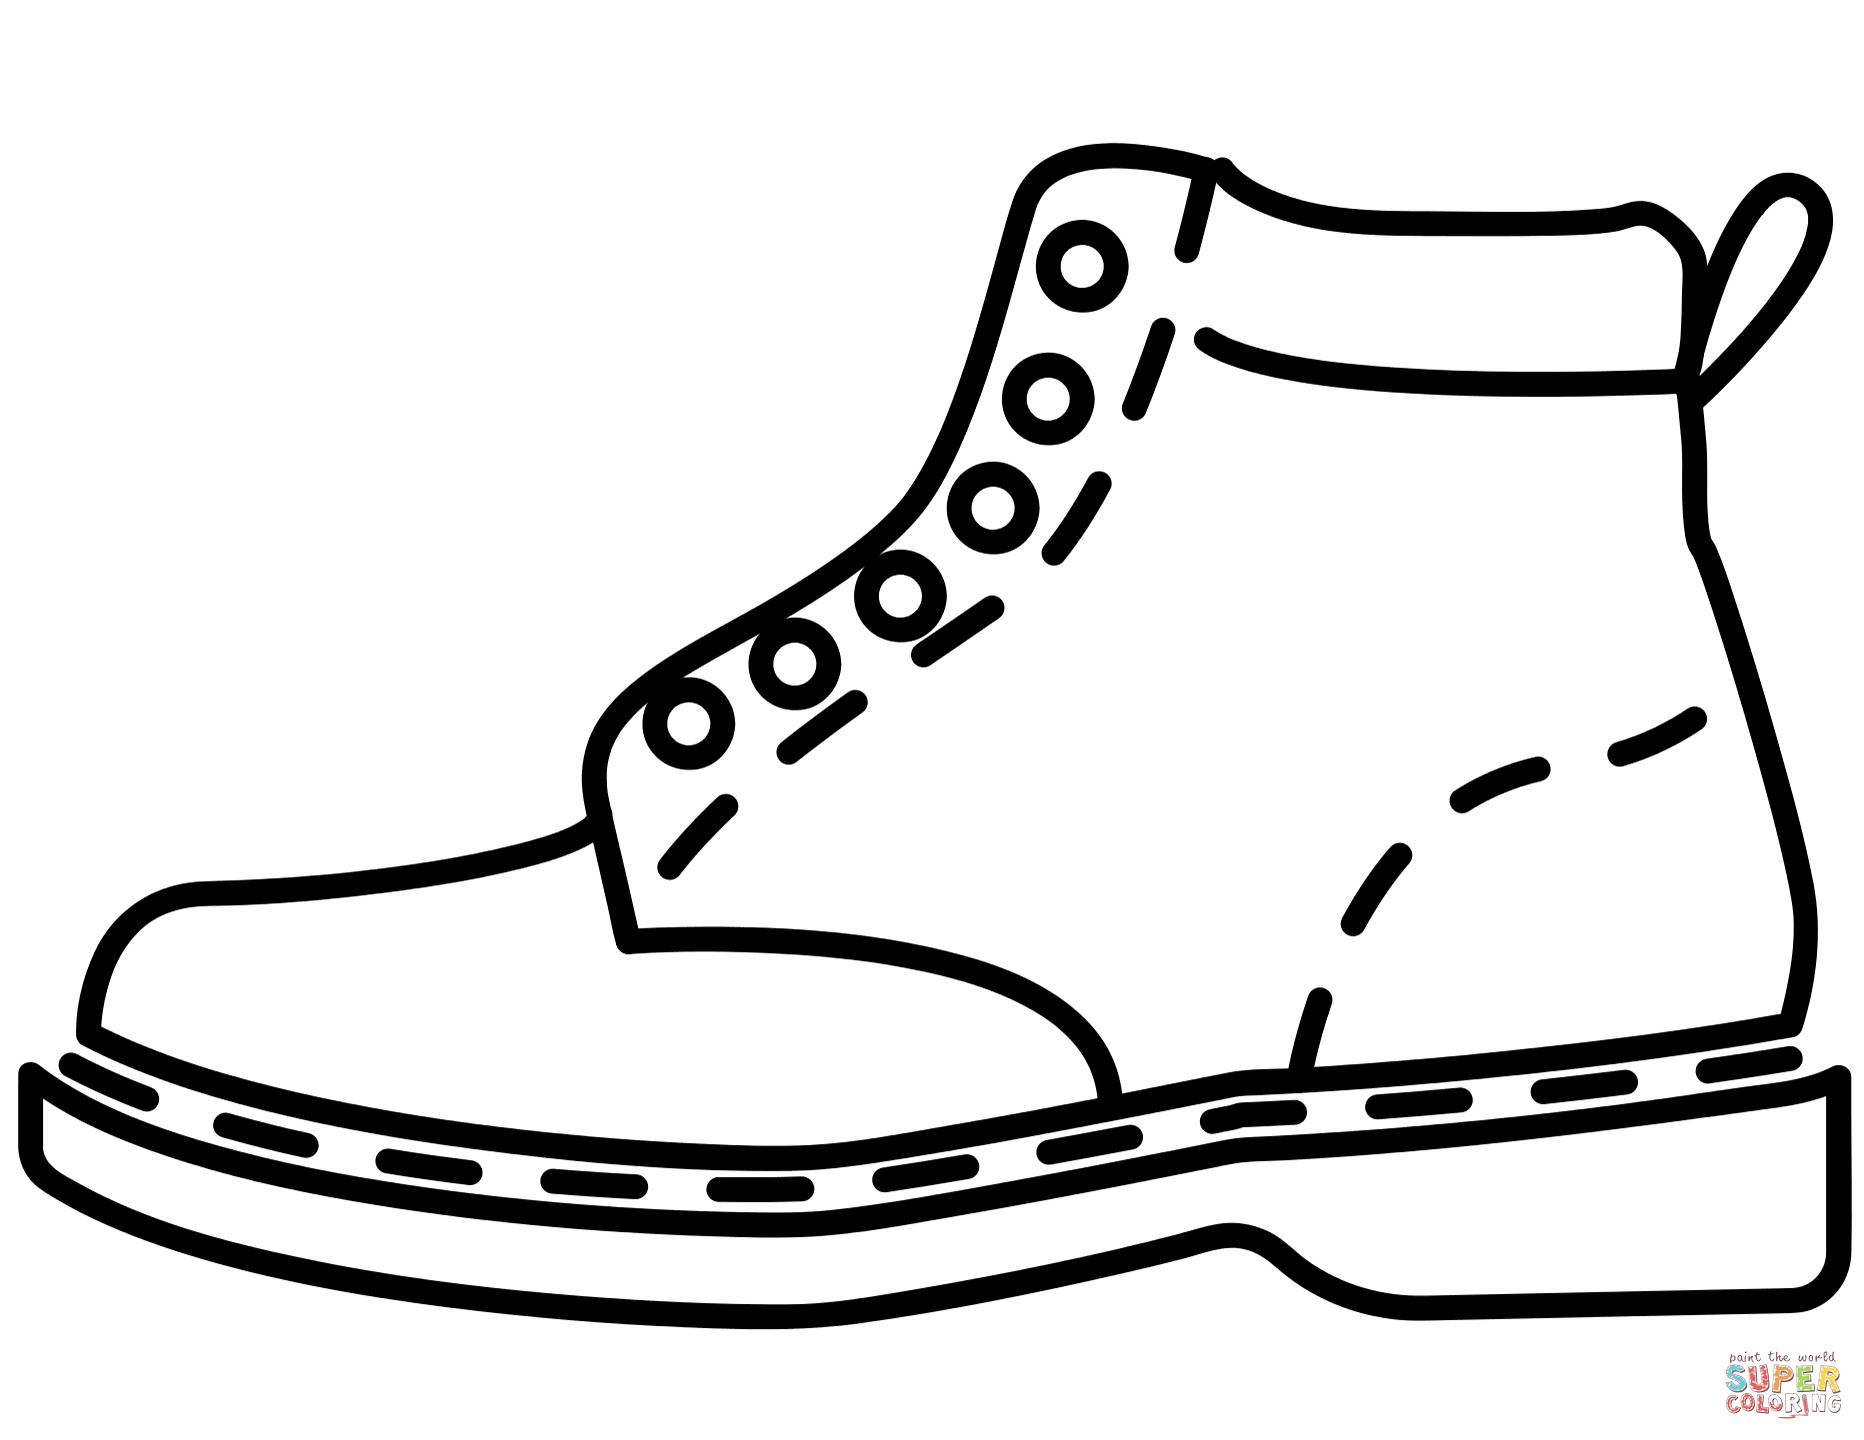 Vans Shoes Coloring Pages at GetColorings.com | Free printable ...